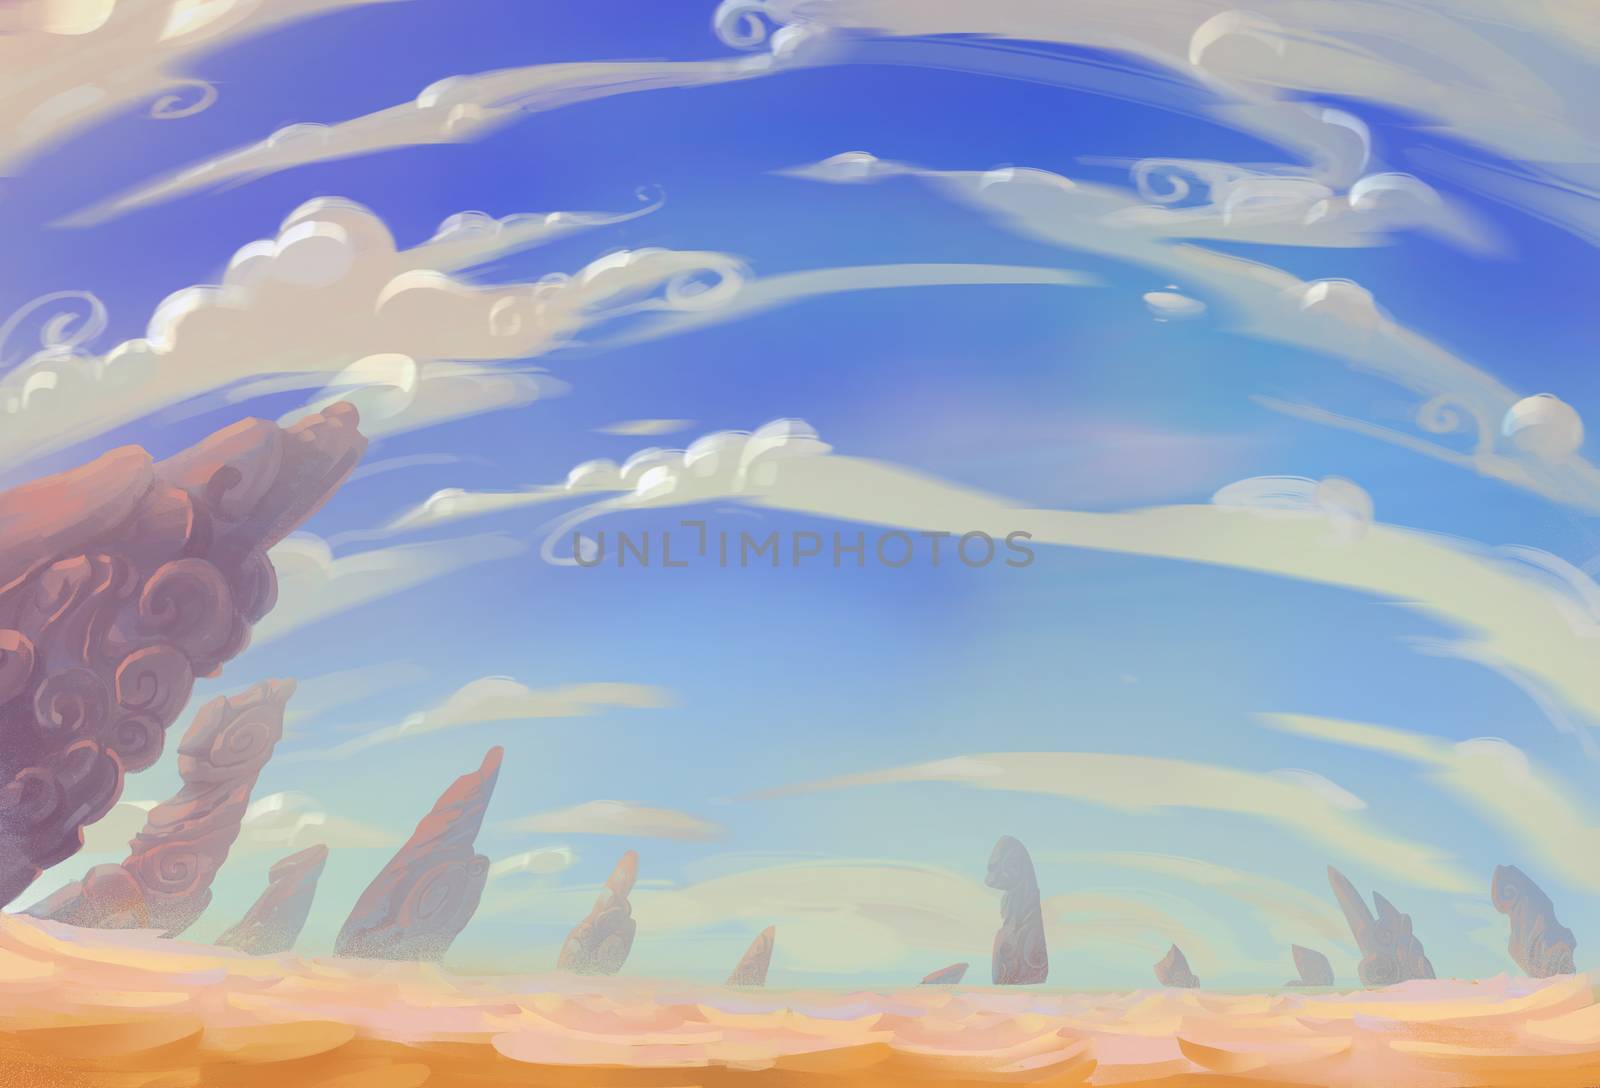 Illustration: The Desert View with different combination: White Cloud, Blue Sky, Shifting Sand, Weird Stone Pillars. Fantastic Realistic Cartoon Style. Wallpaper Background Scene Design. by NextMars